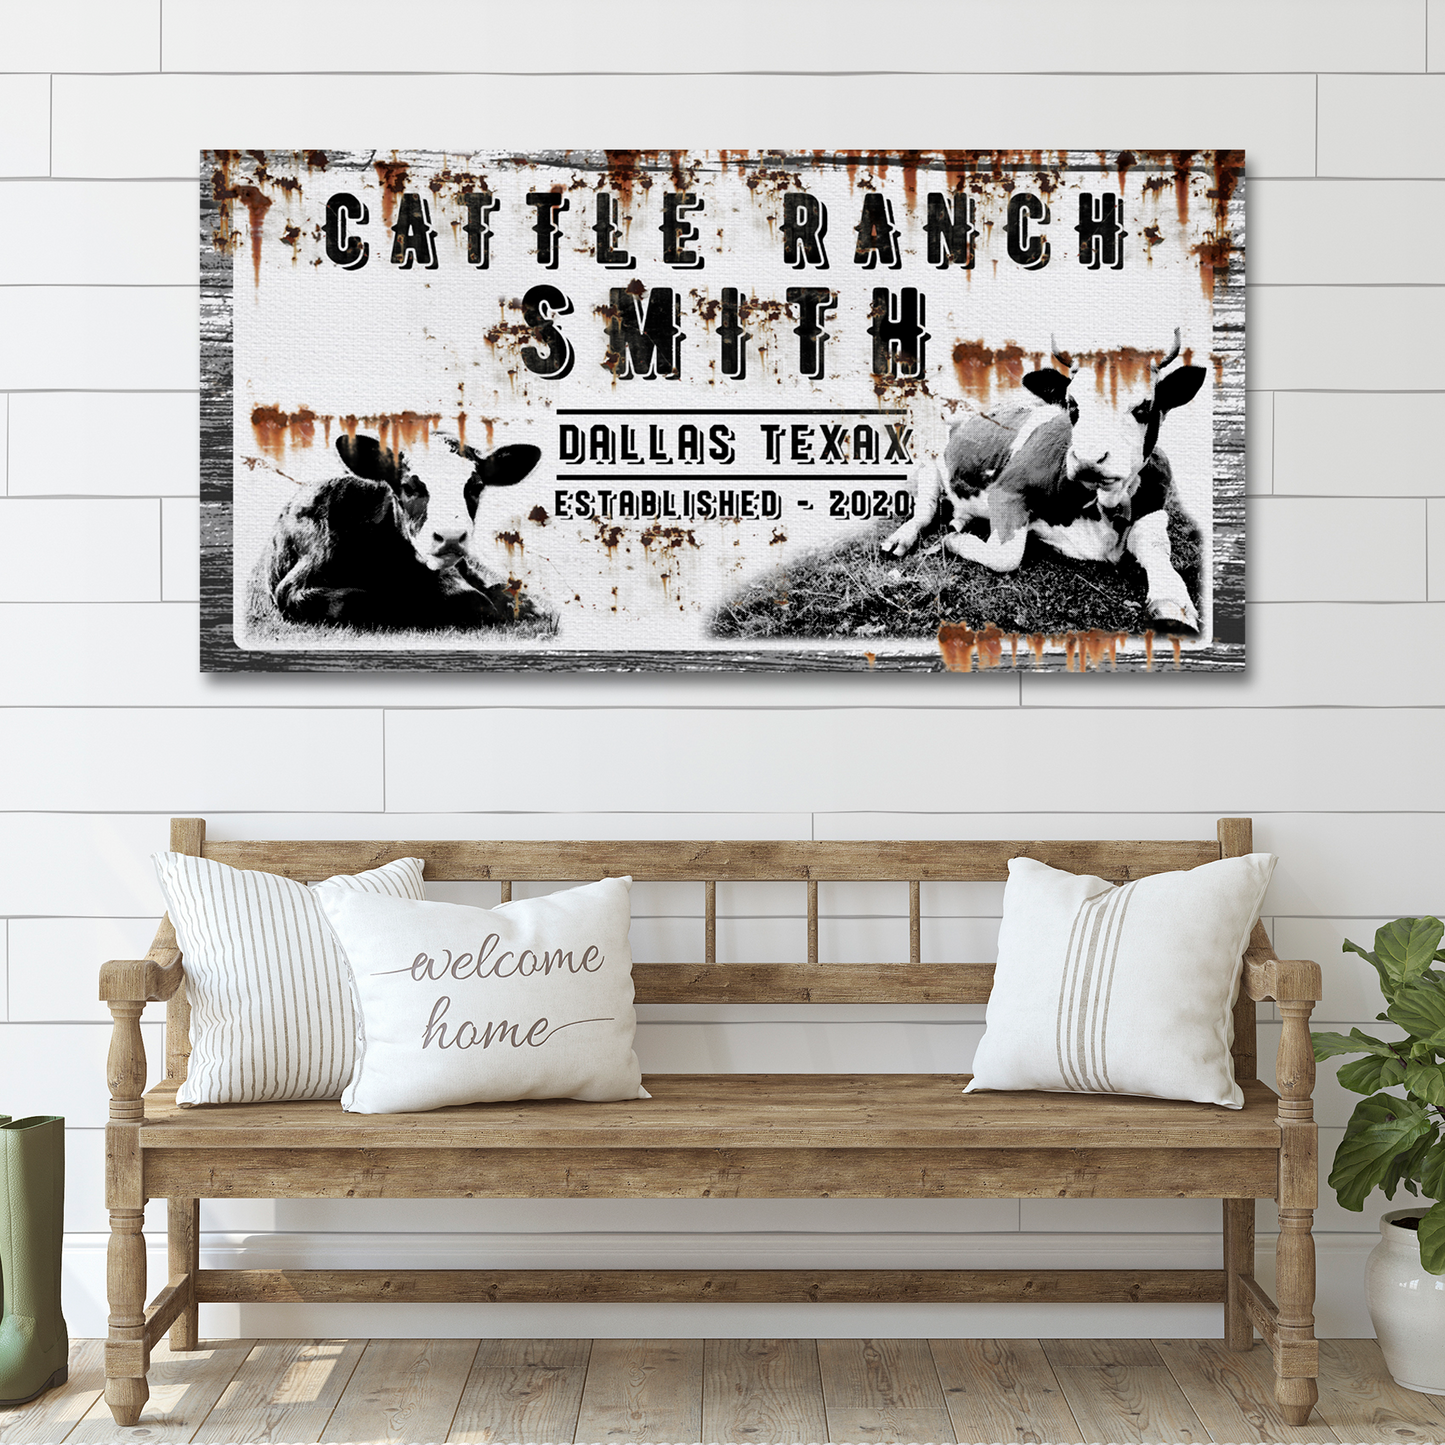 Cattle Ranch Vintage Sign Style 2 - Image by Tailored Canvases